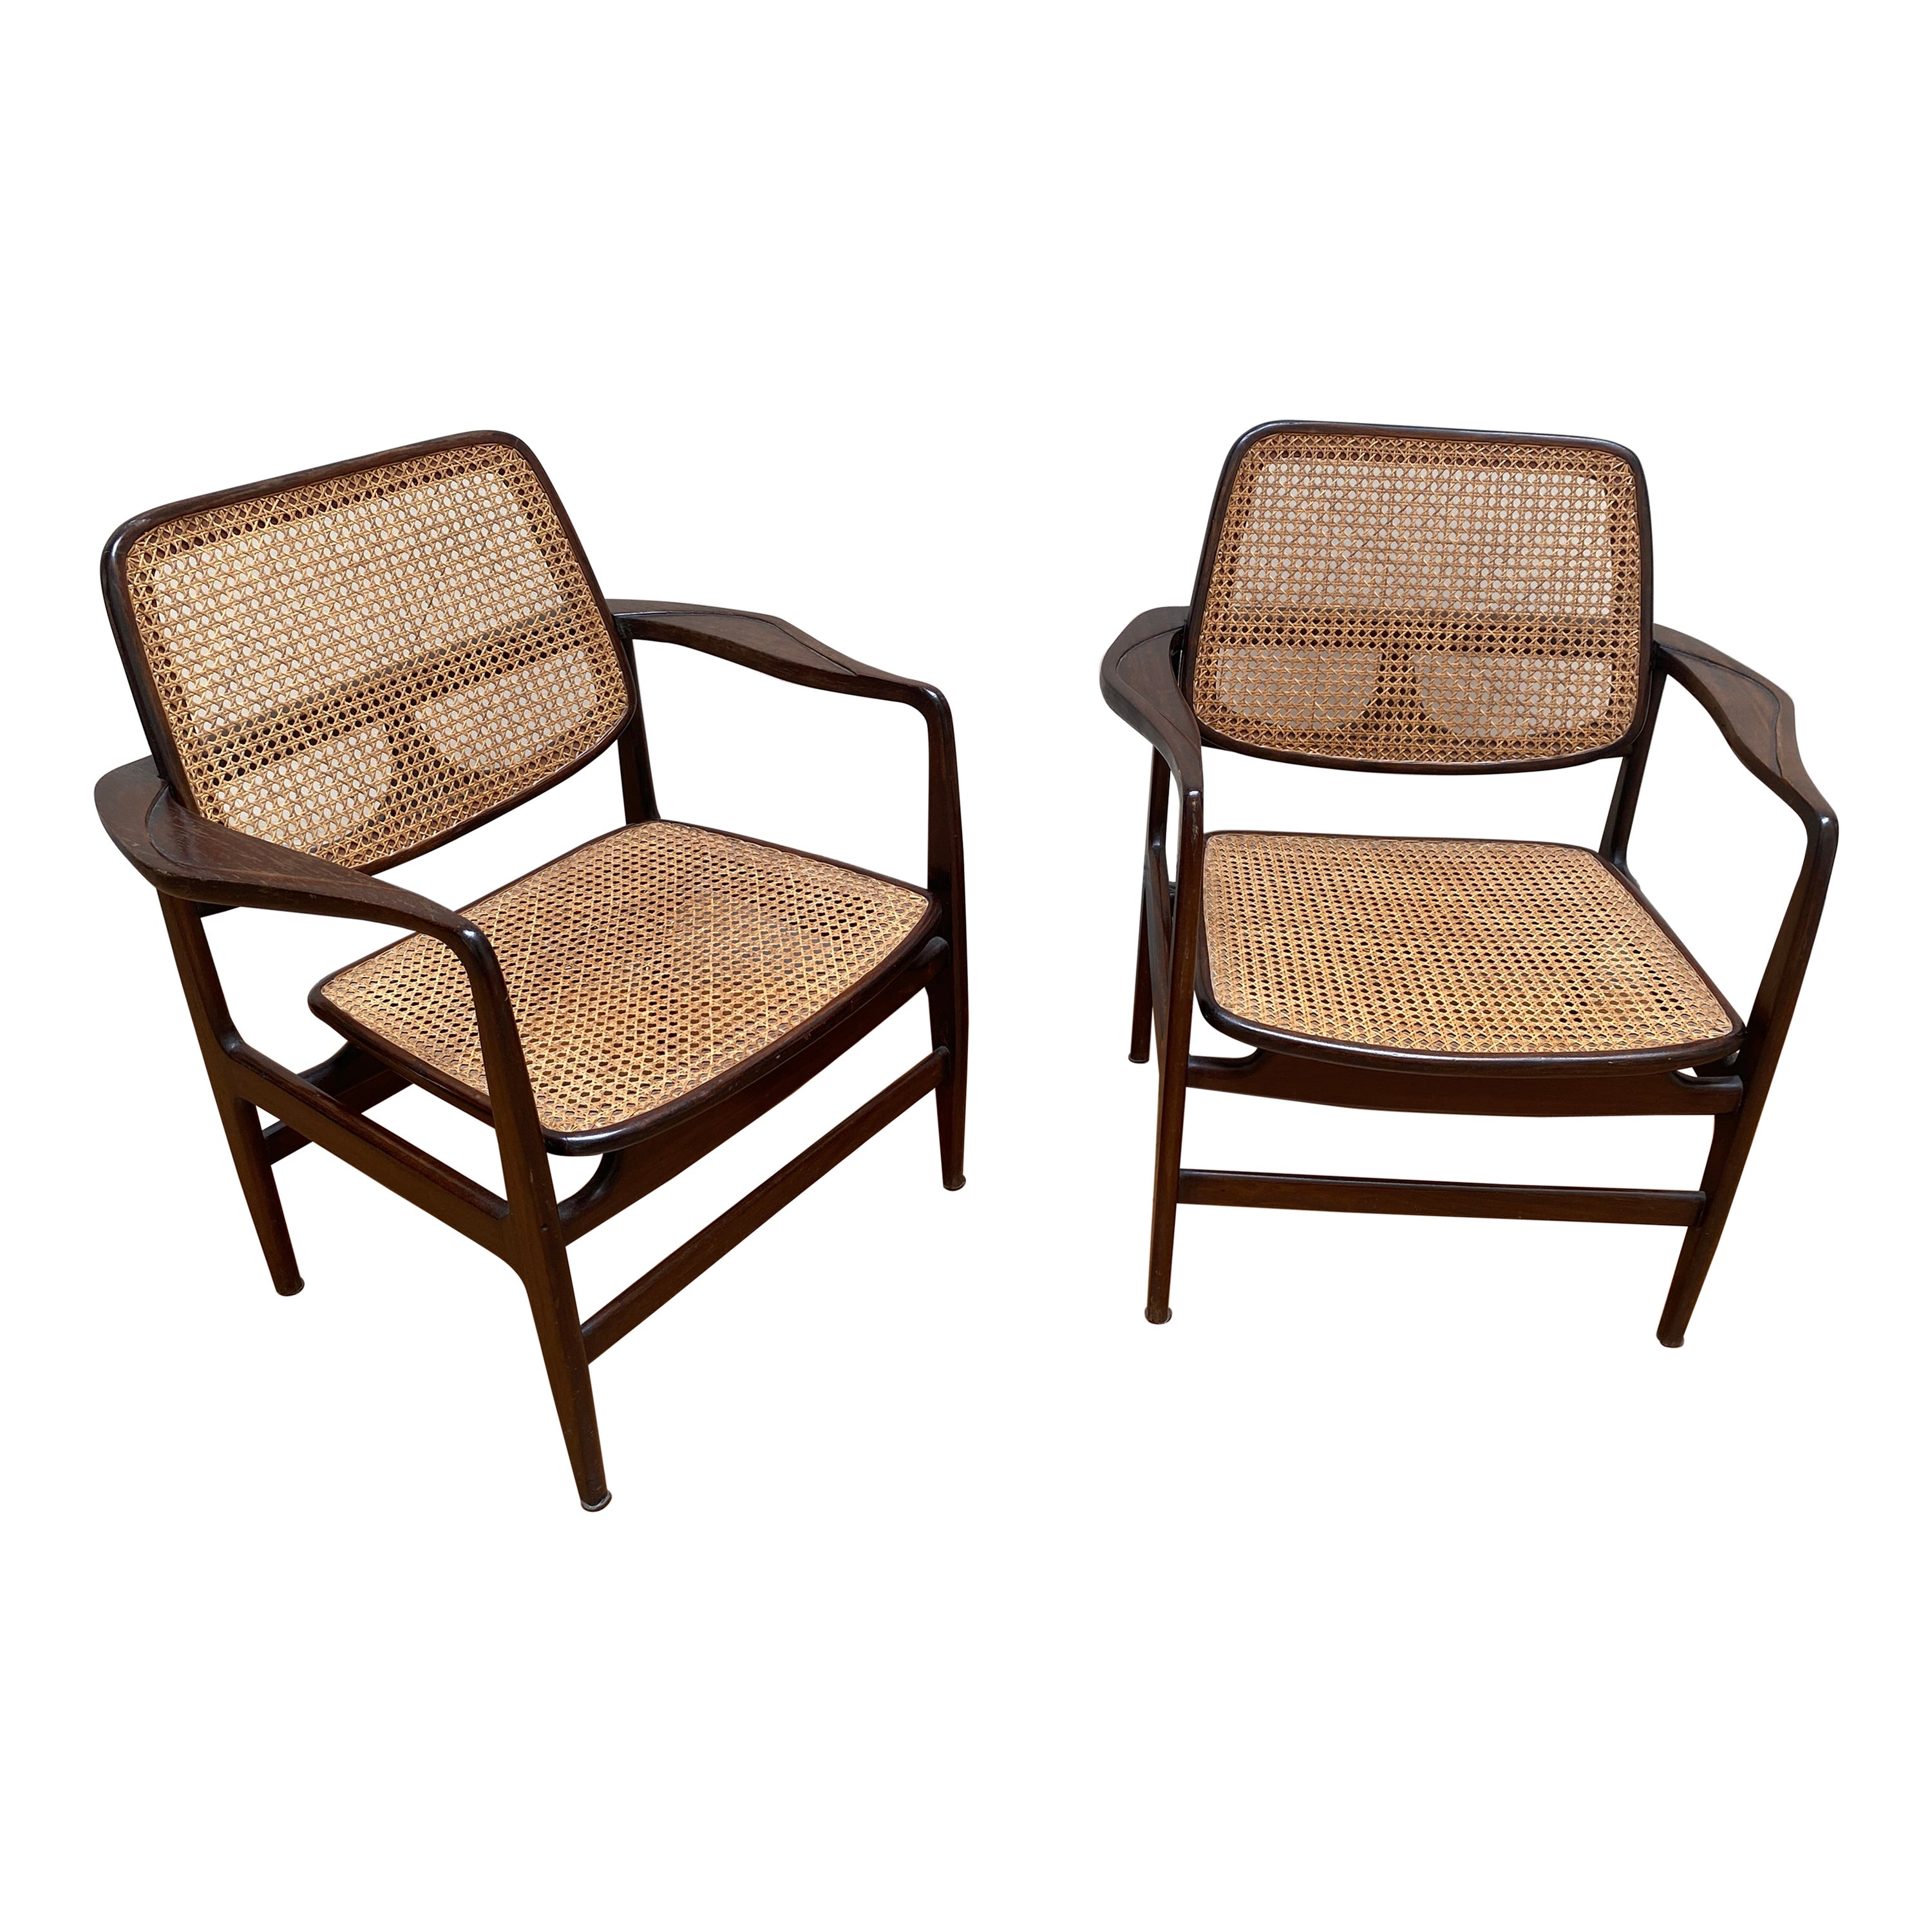 Set of Two Mid-Century Modern Oscar Armchairs by Sergio Rodrigues, Brazil, 1956 For Sale